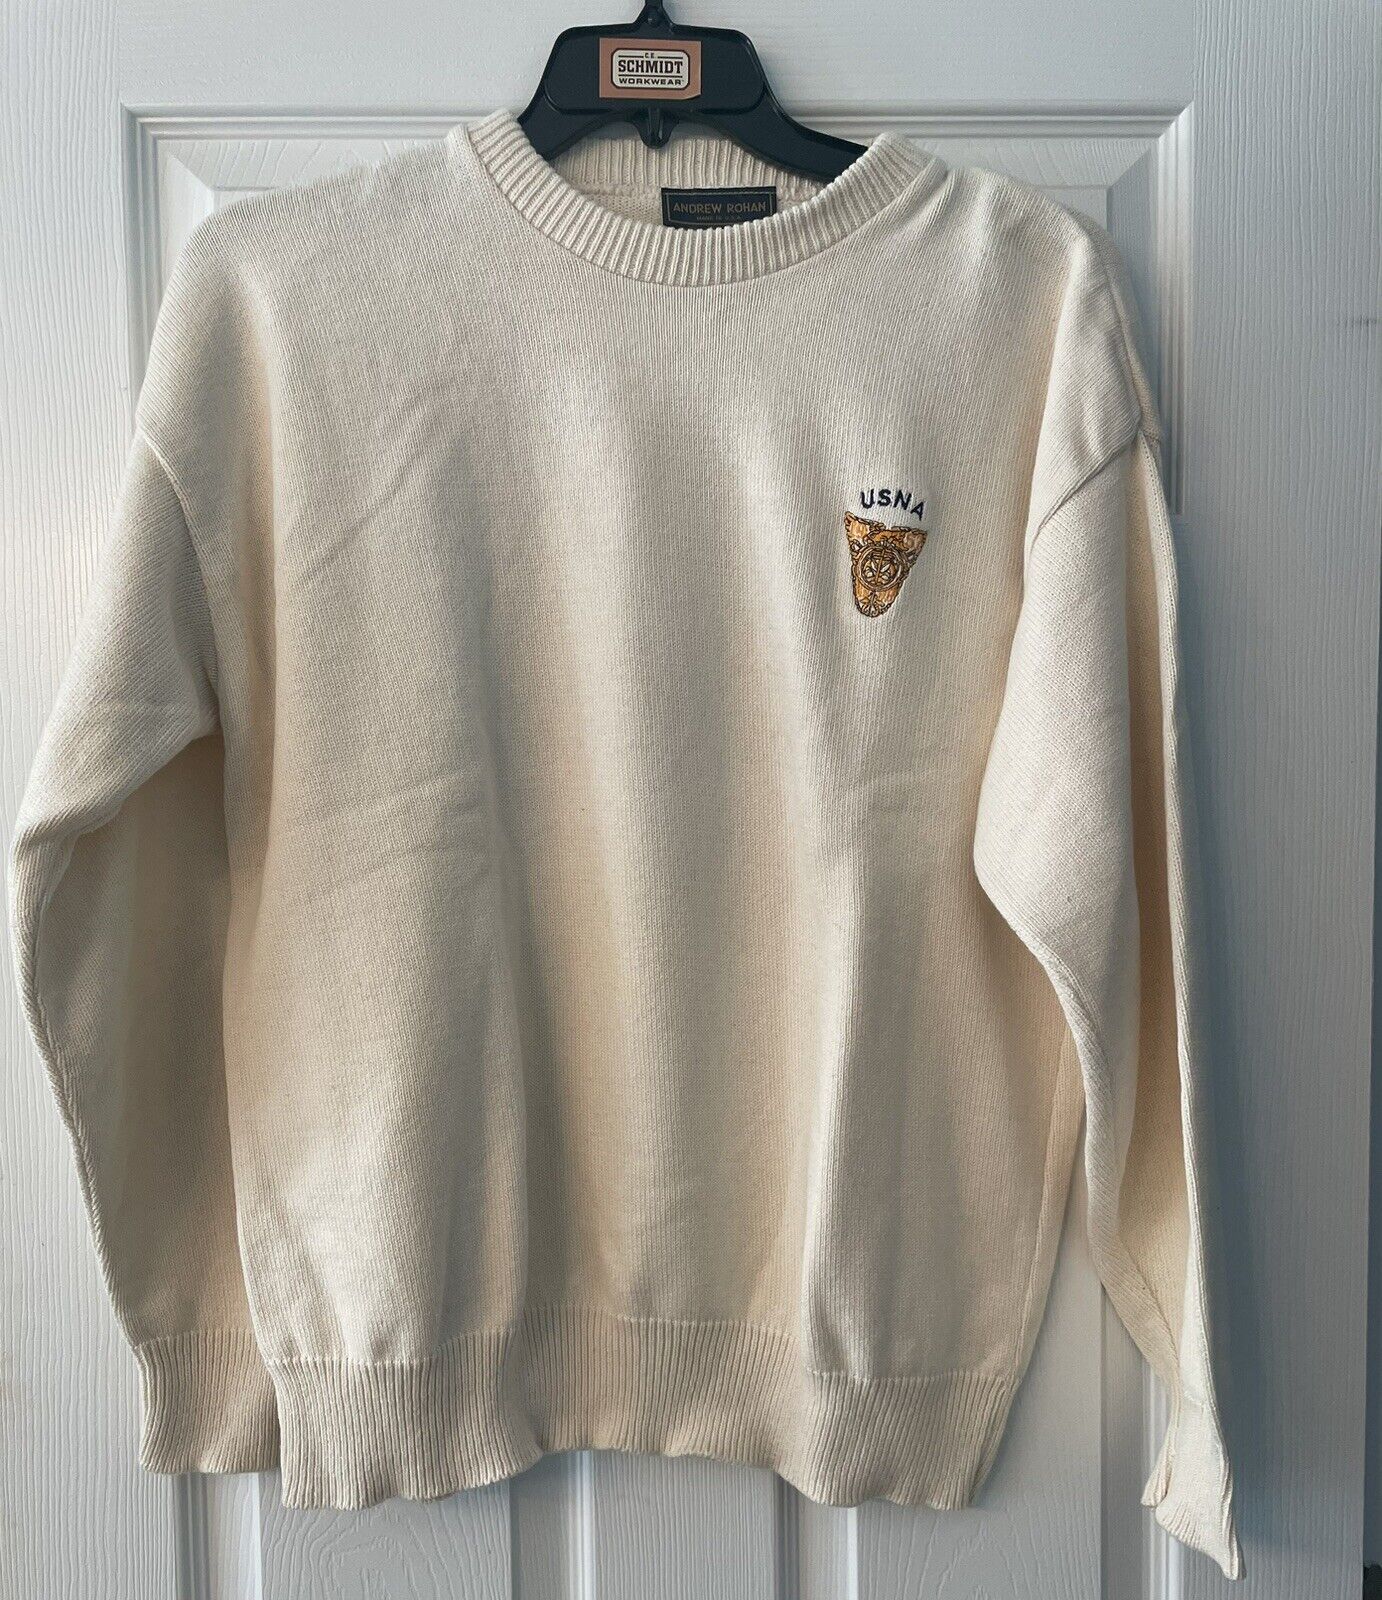 Vintage Naval Academy Sweater Size Large With USNA Logo Cream Color